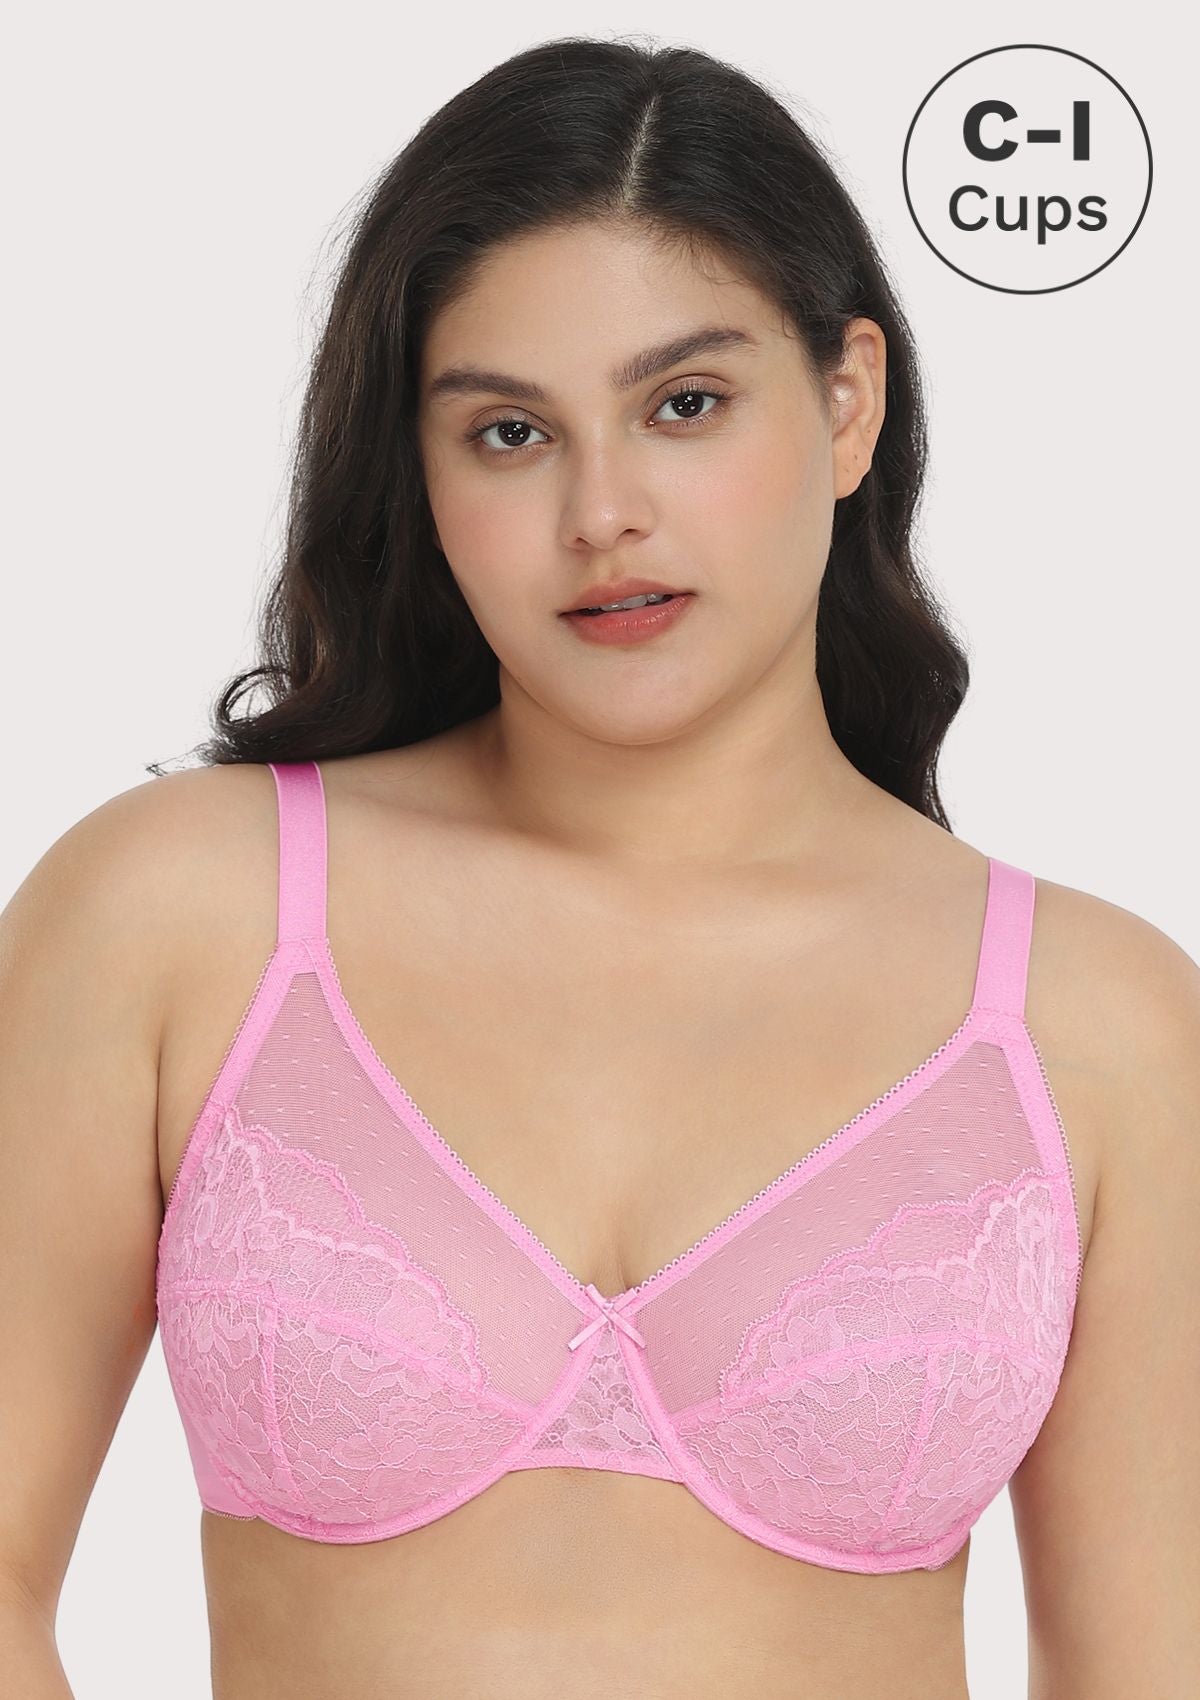 HSIA Enchante Lacy Bra: Comfy Sheer Lace Bra With Lift - Pink / 34 / D